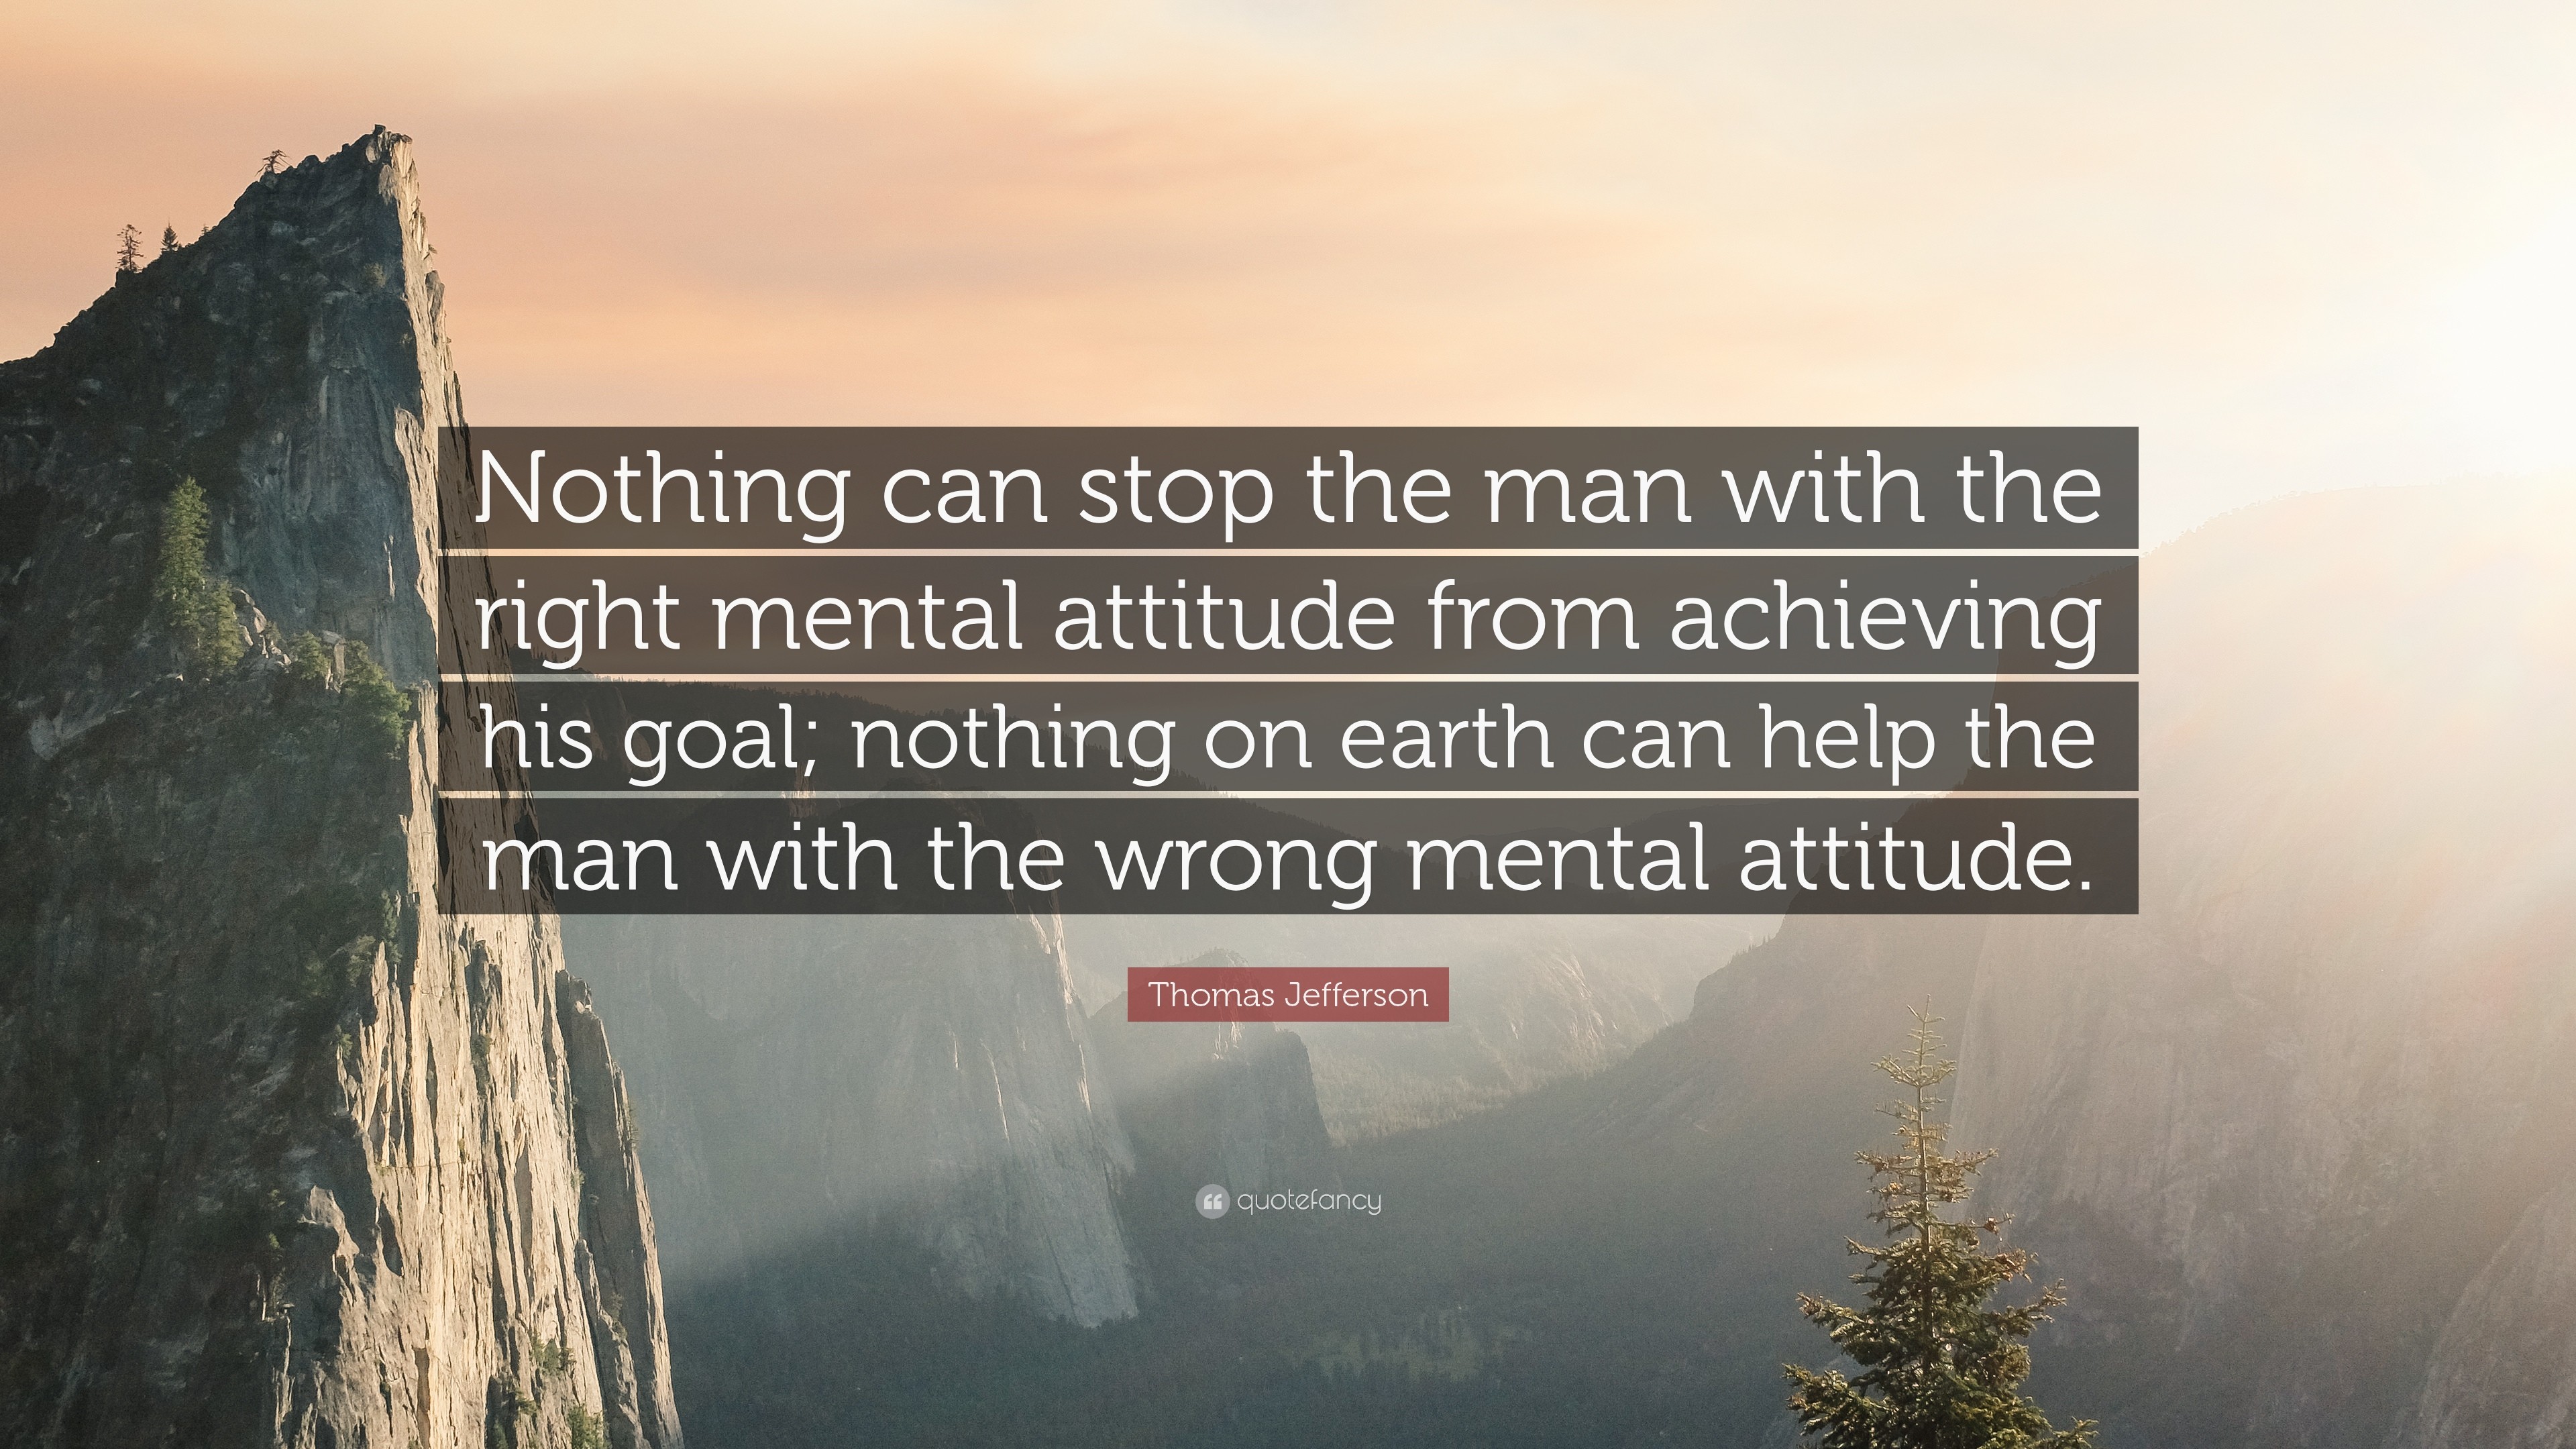 3840x2160 Thomas Jefferson Quote: “Nothing can stop the man with the right mental  attitude from